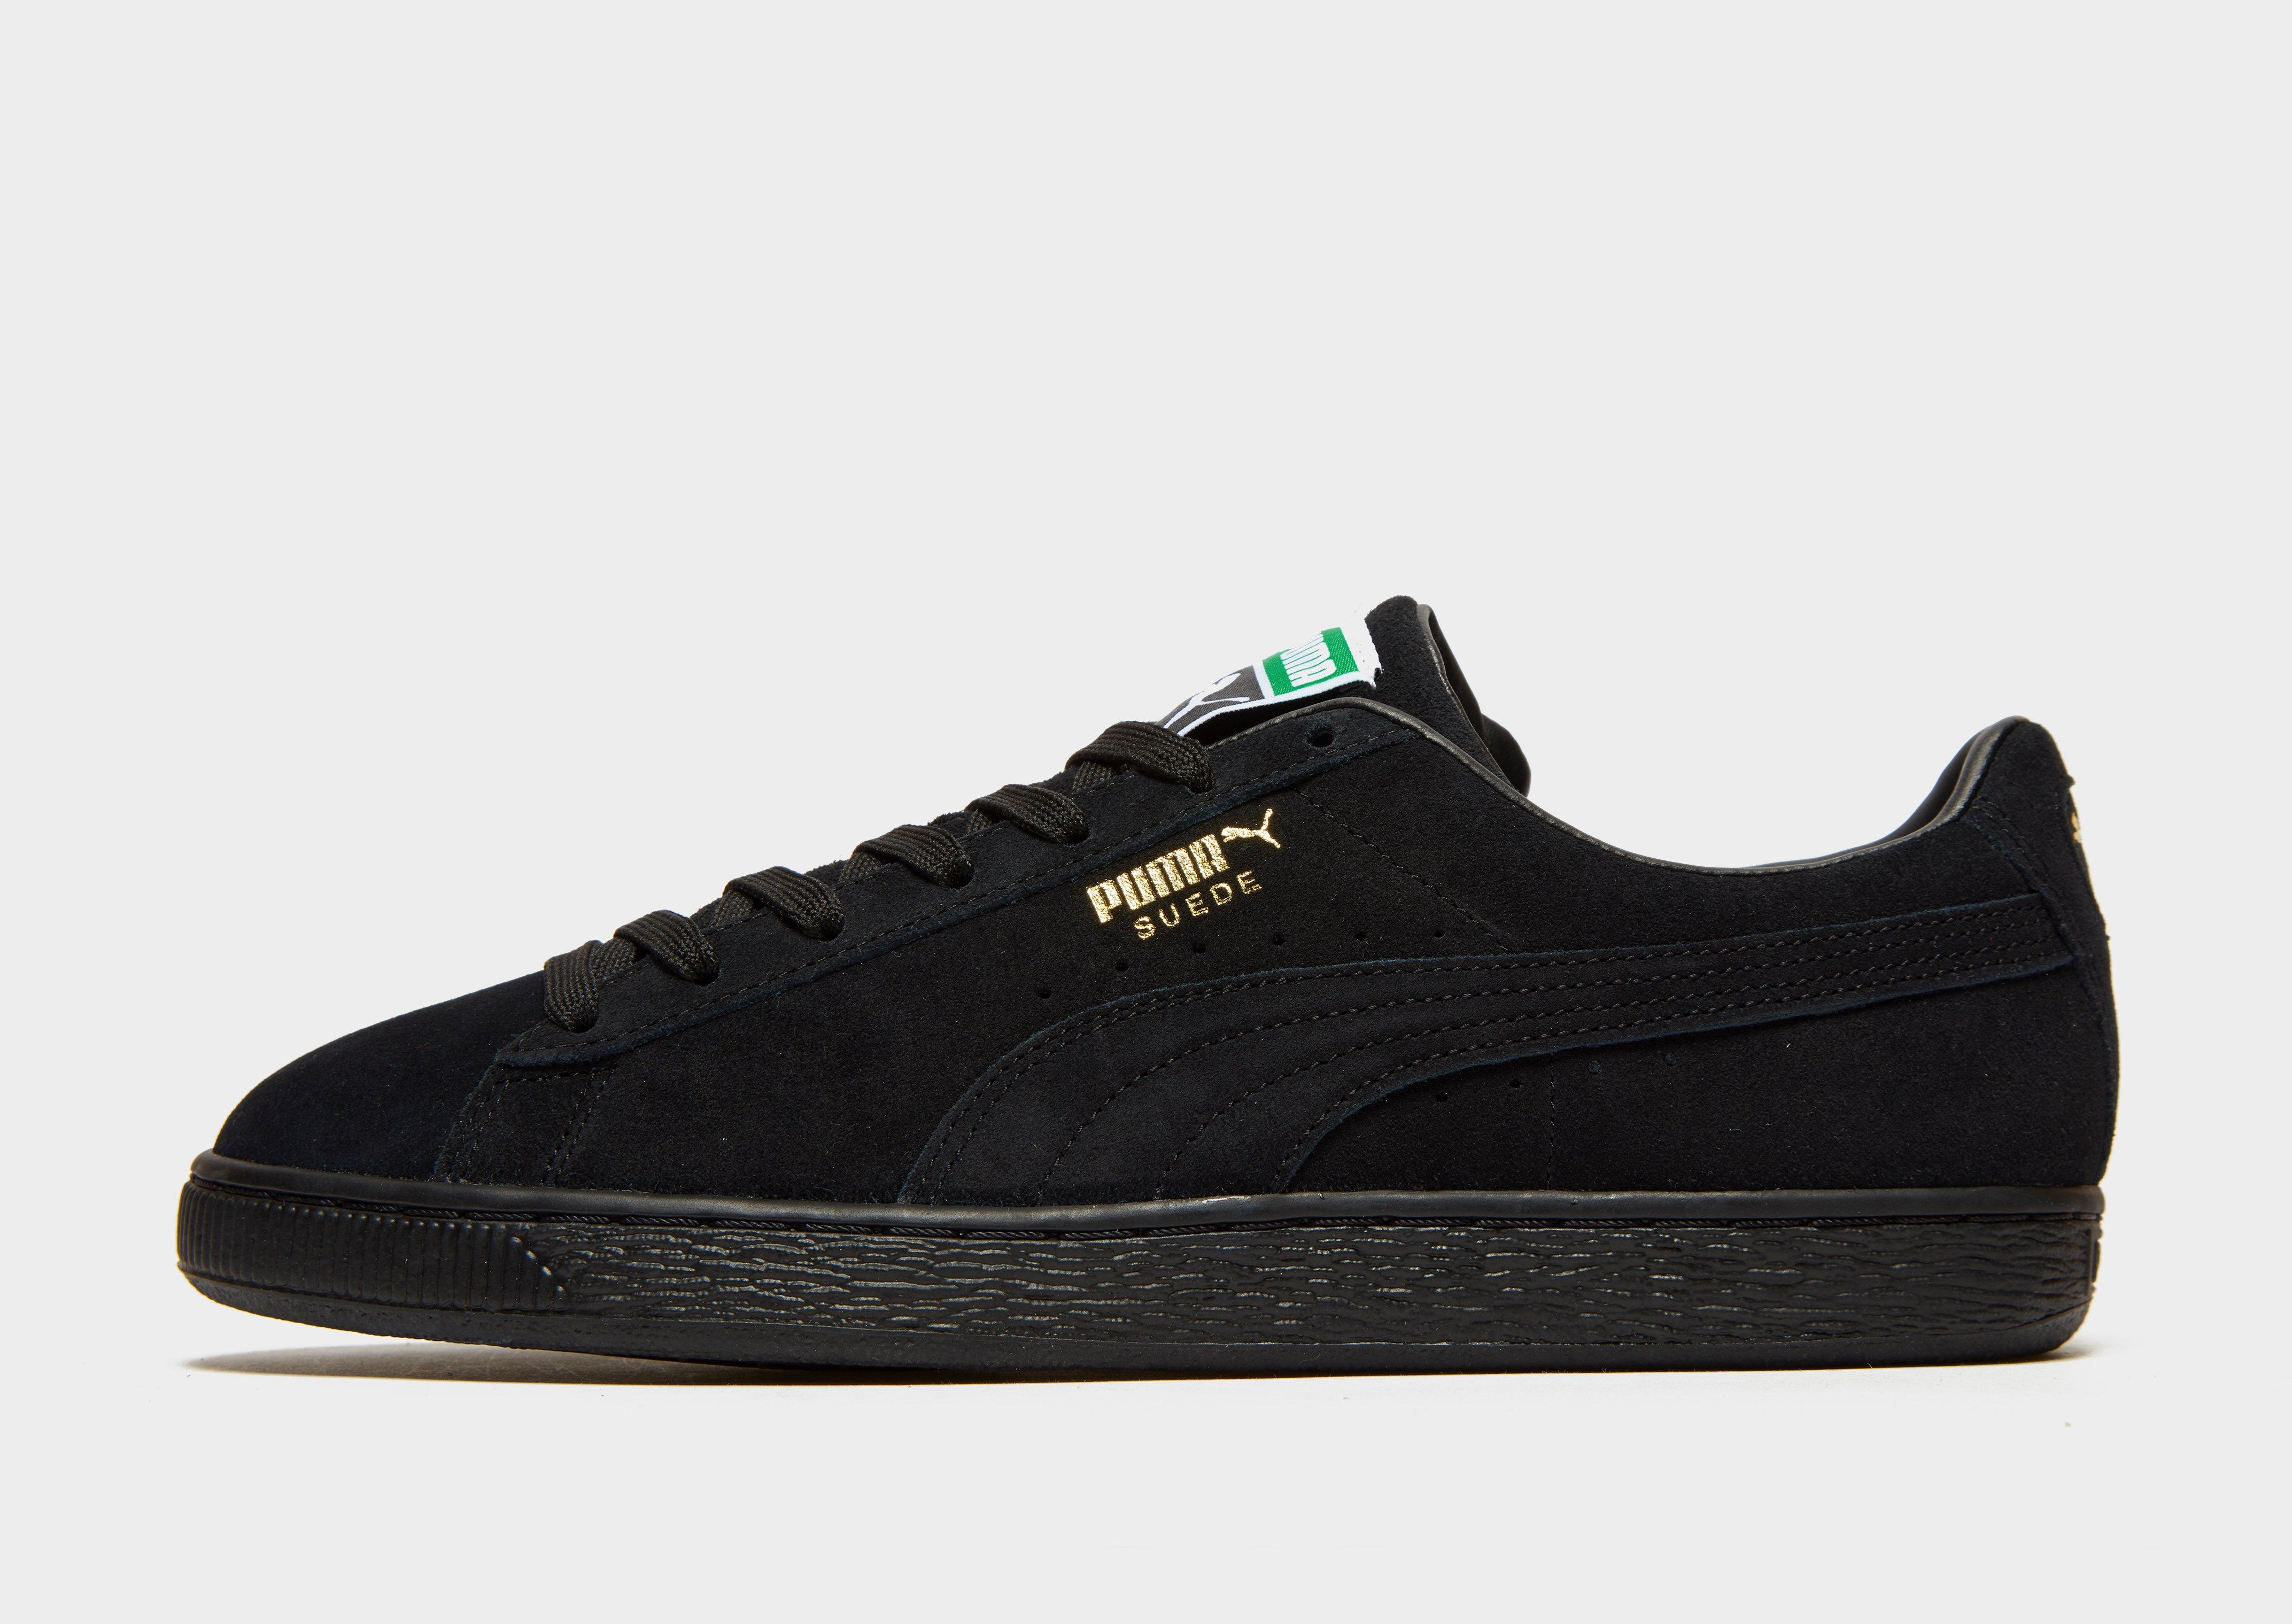 Jual PUMA SUEDE CLASSIC ALL BLACK Shopee Indonesia | vlr.eng.br